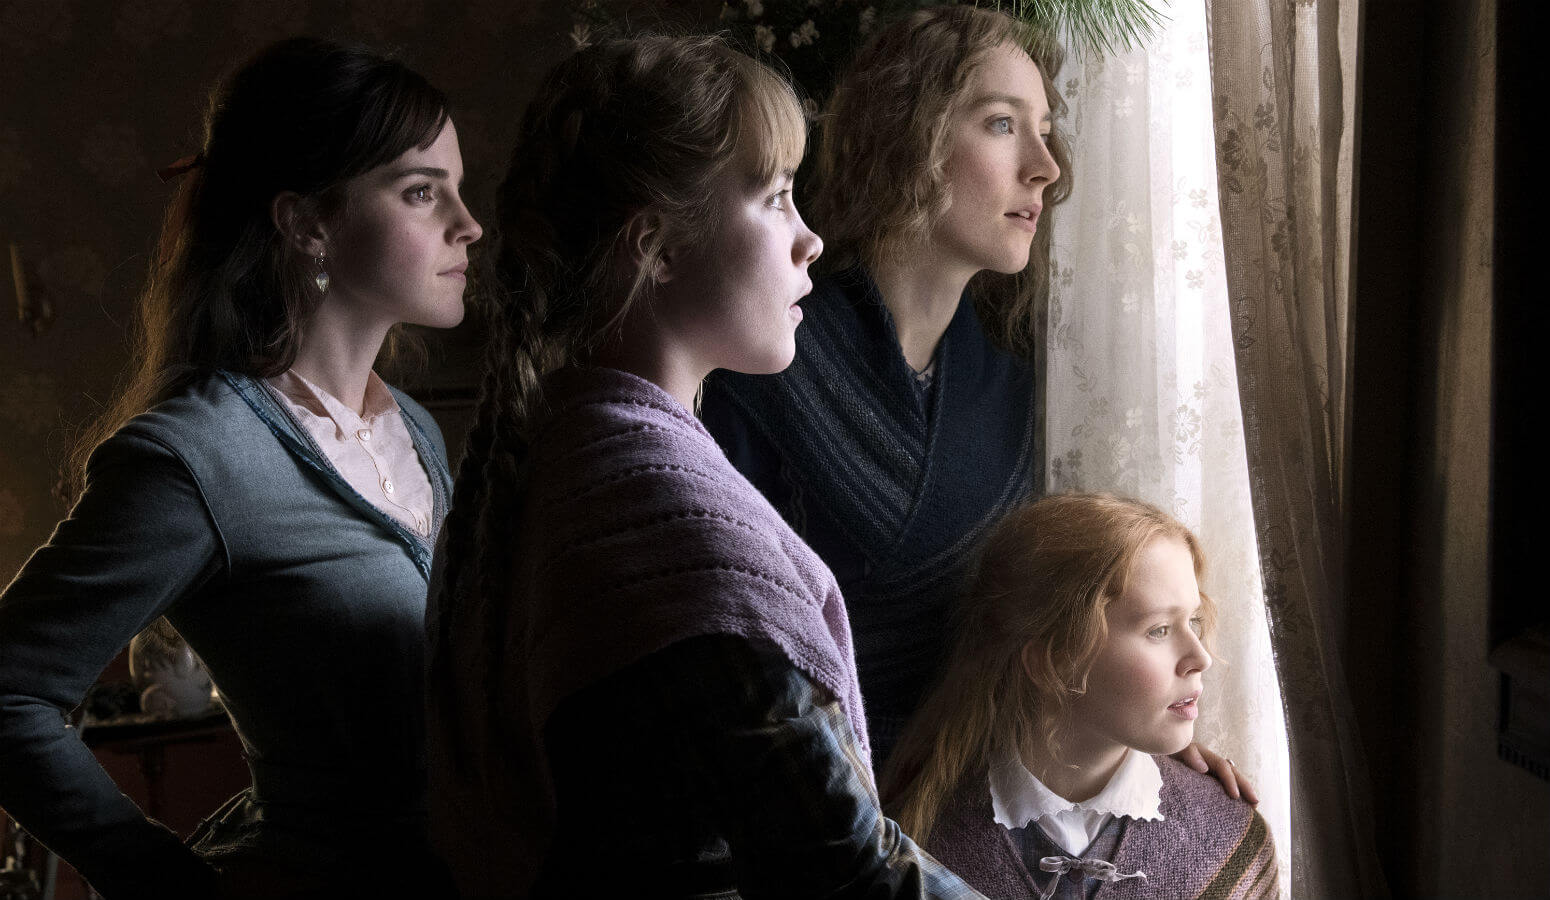 Discover a beautifully told story with the new ‘Little Women’ film